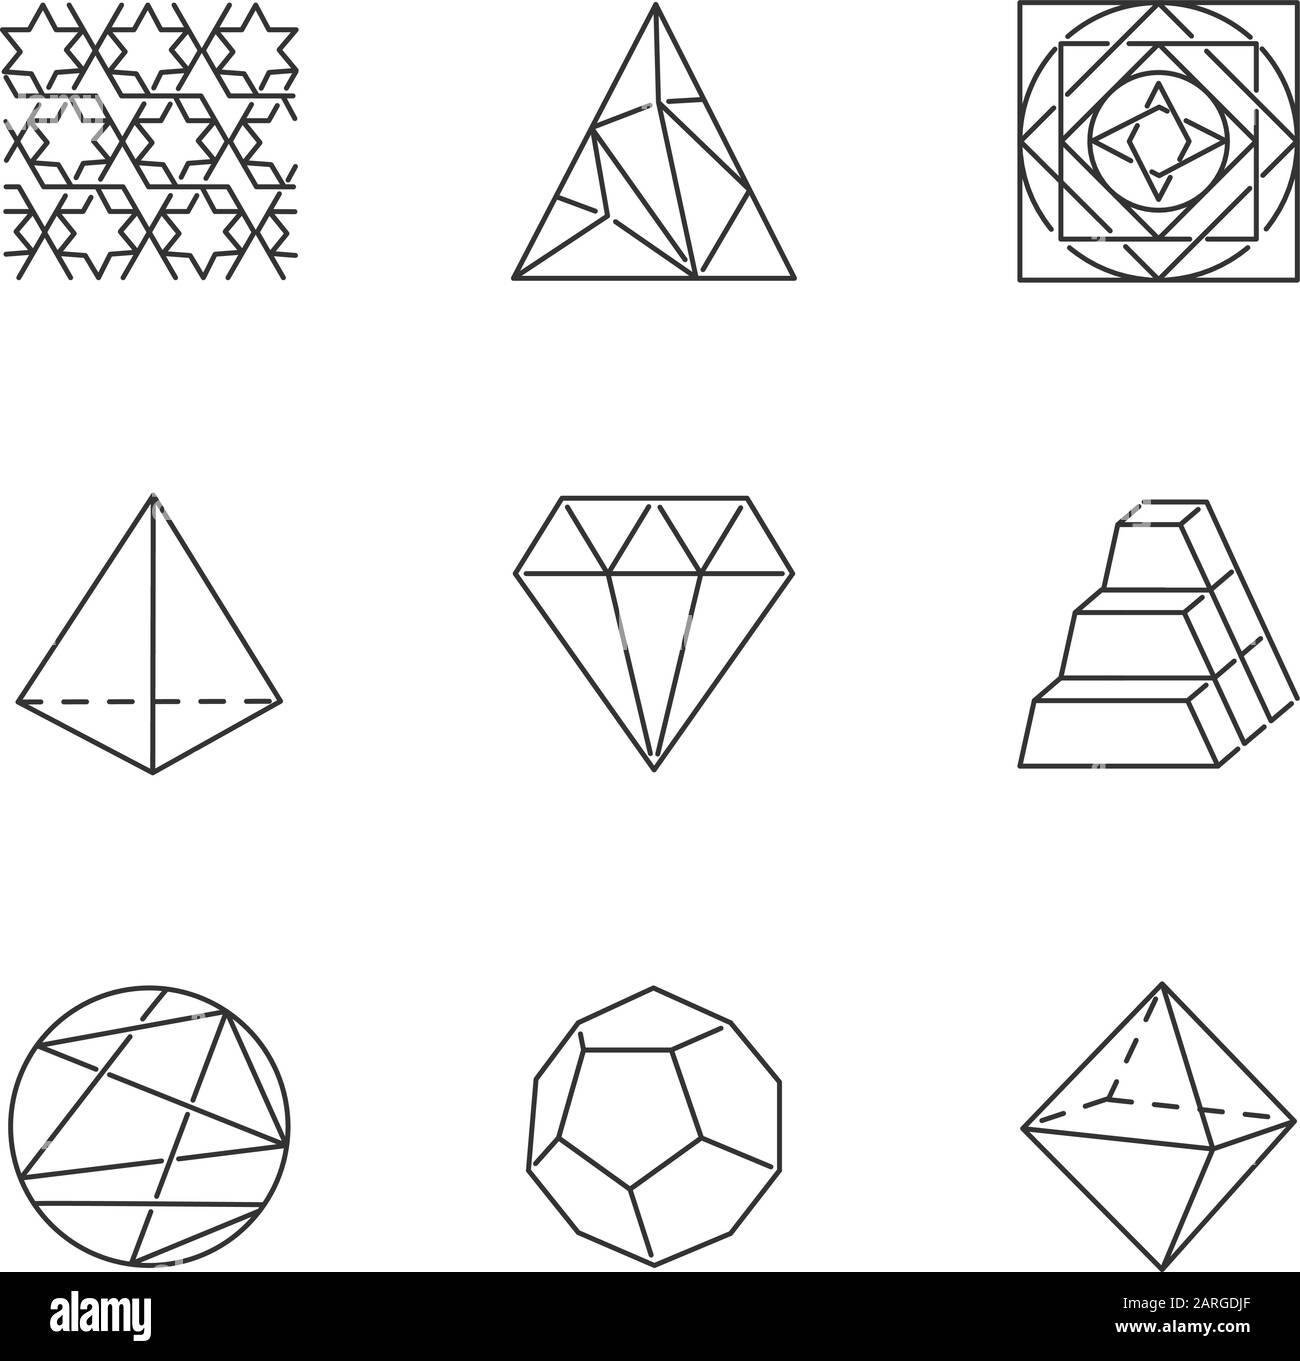 Geometric figures linear icons set. Abstract shapes. Isometric forms. Polygonal triangle. Prism model. Double pyramid. Thin line contour symbols. Isol Stock Vector